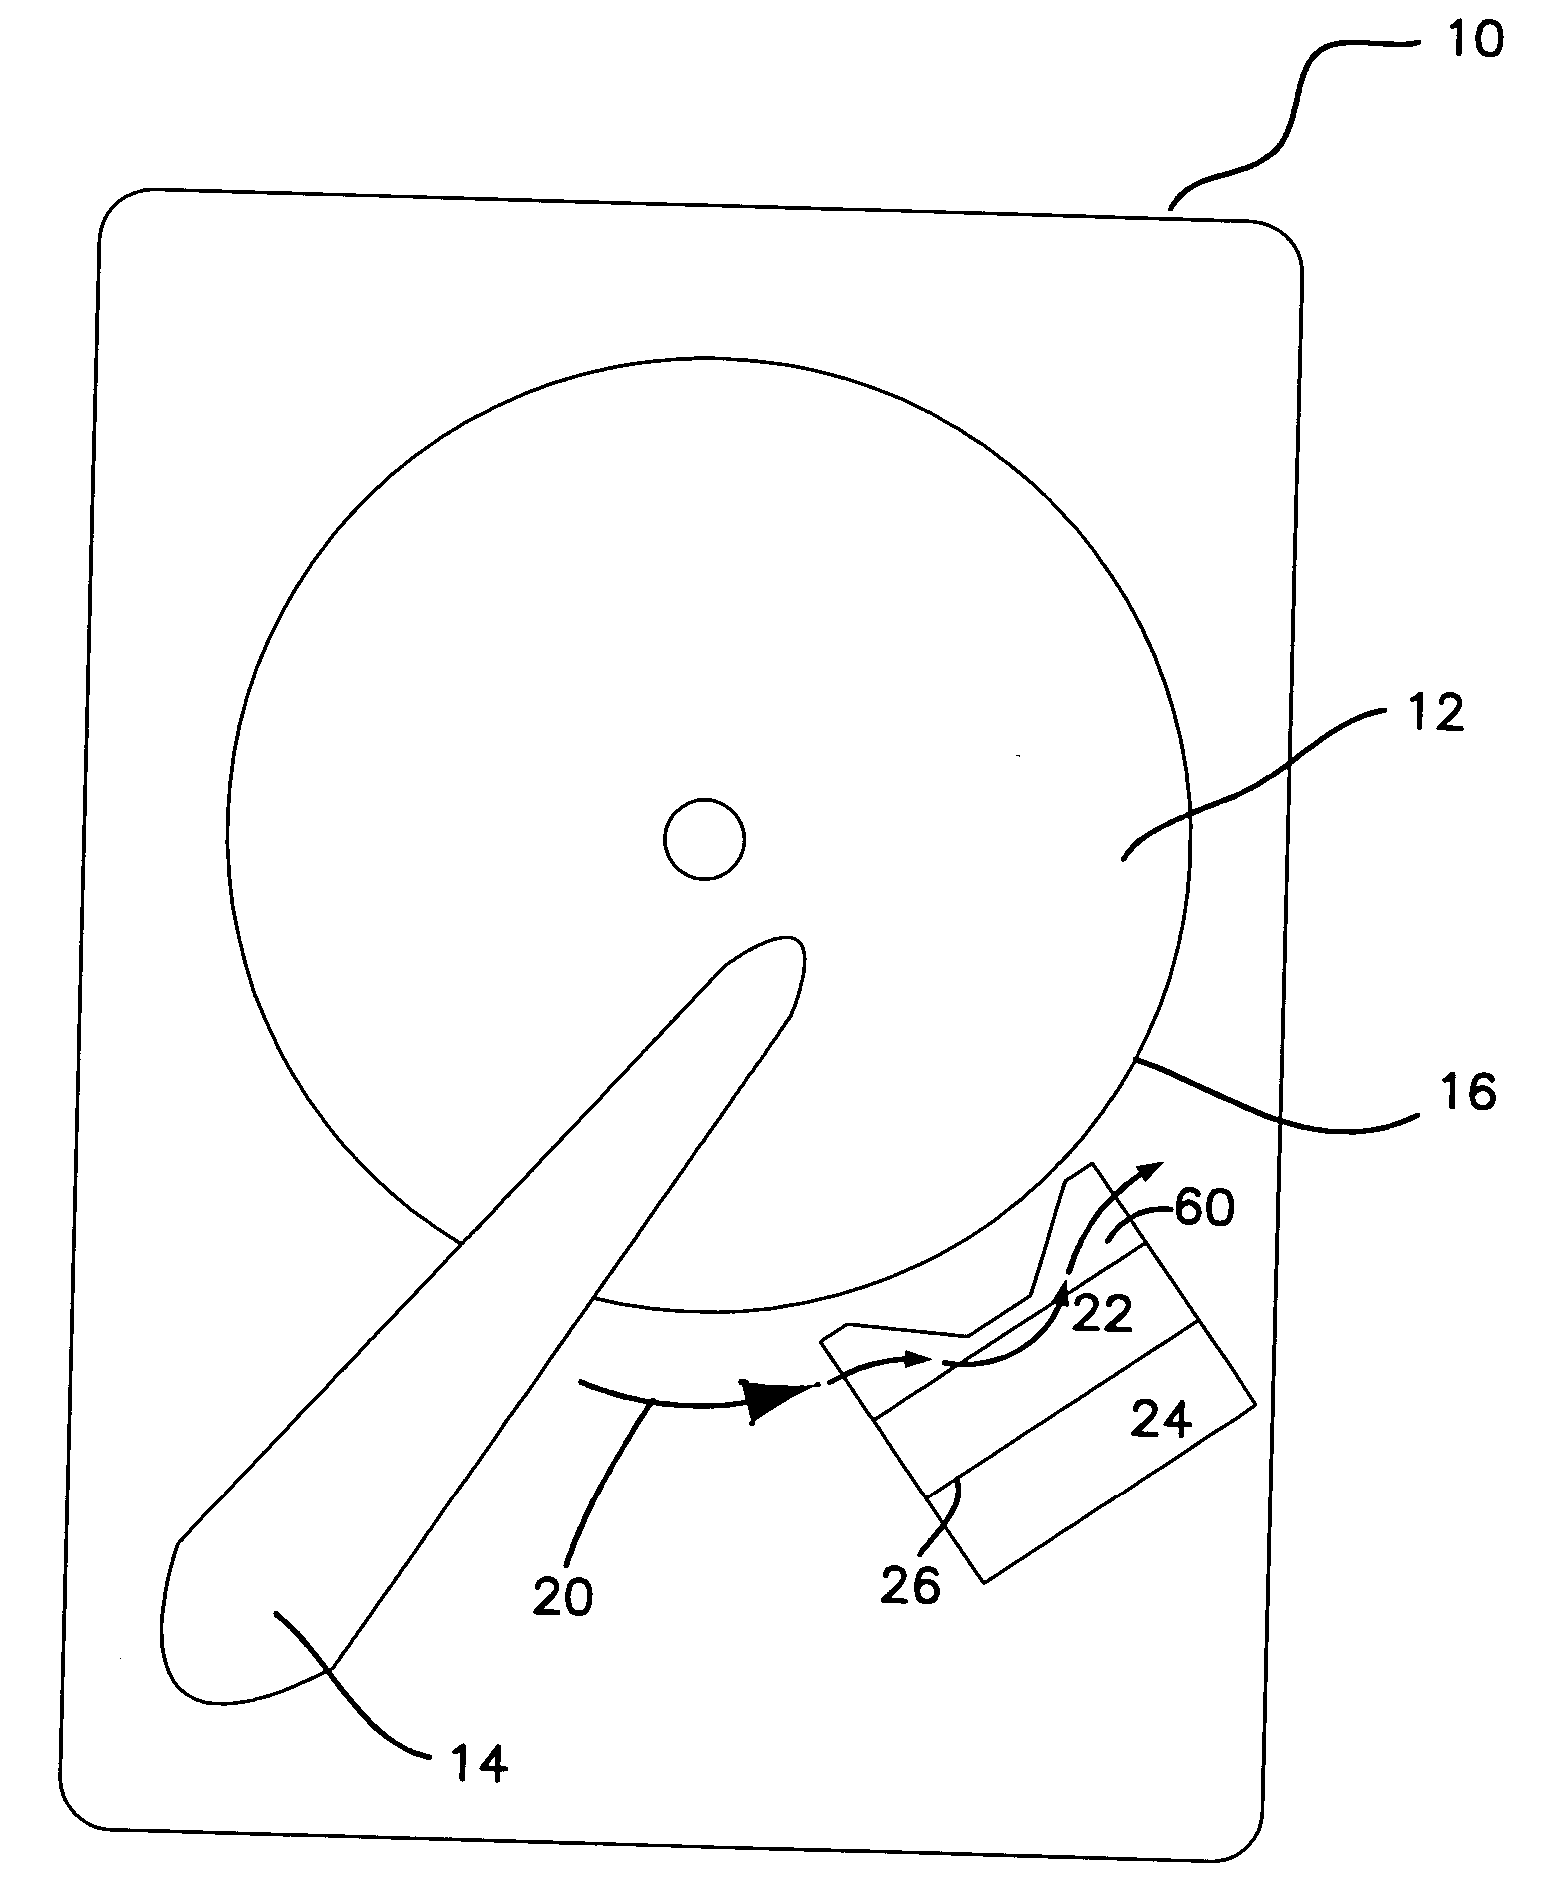 Integrated chemical breather filter with high and low pressure surfaces